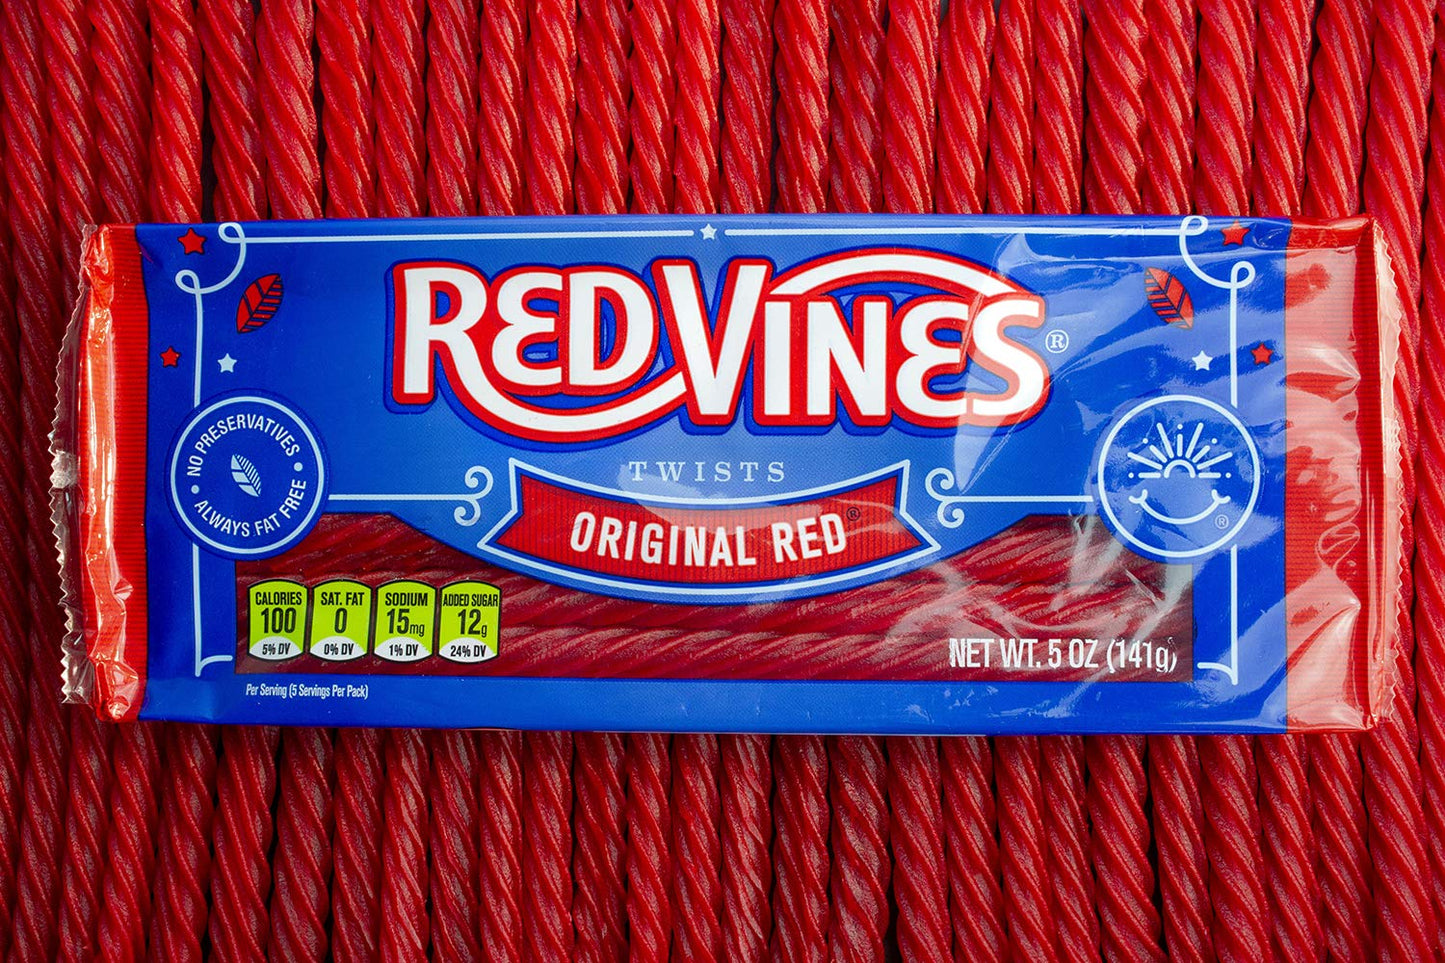 Red Vines Licorice Twists, Original Red Flavor, Soft & Chewy Candy, 5oz Tray  (24 Pack)